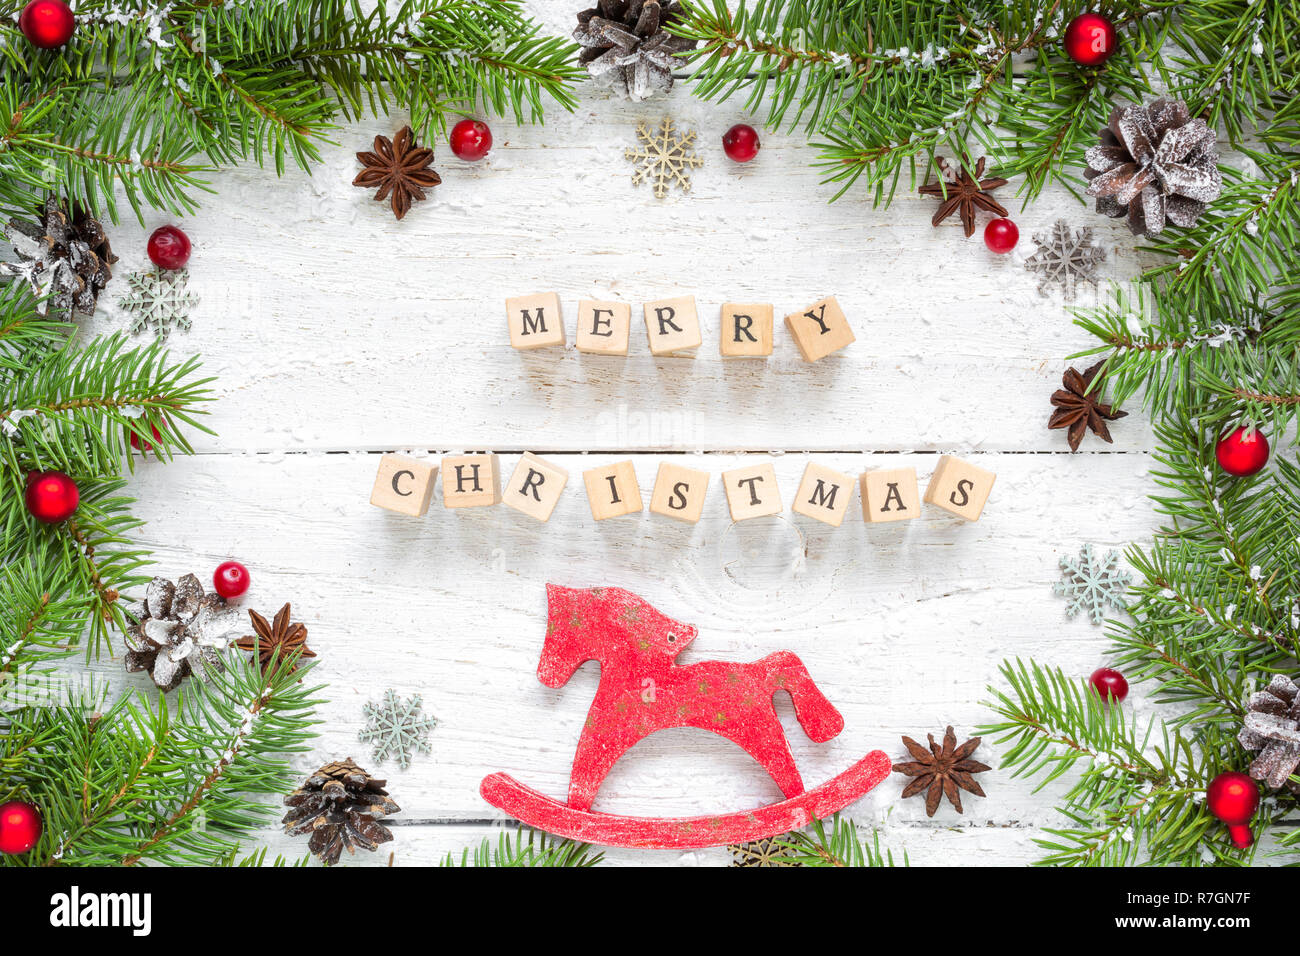 merry christmas inscription in frame made of fir branches, festive decorations, retro toy horse and pine cones on white wooden table. Christmas backgr Stock Photo